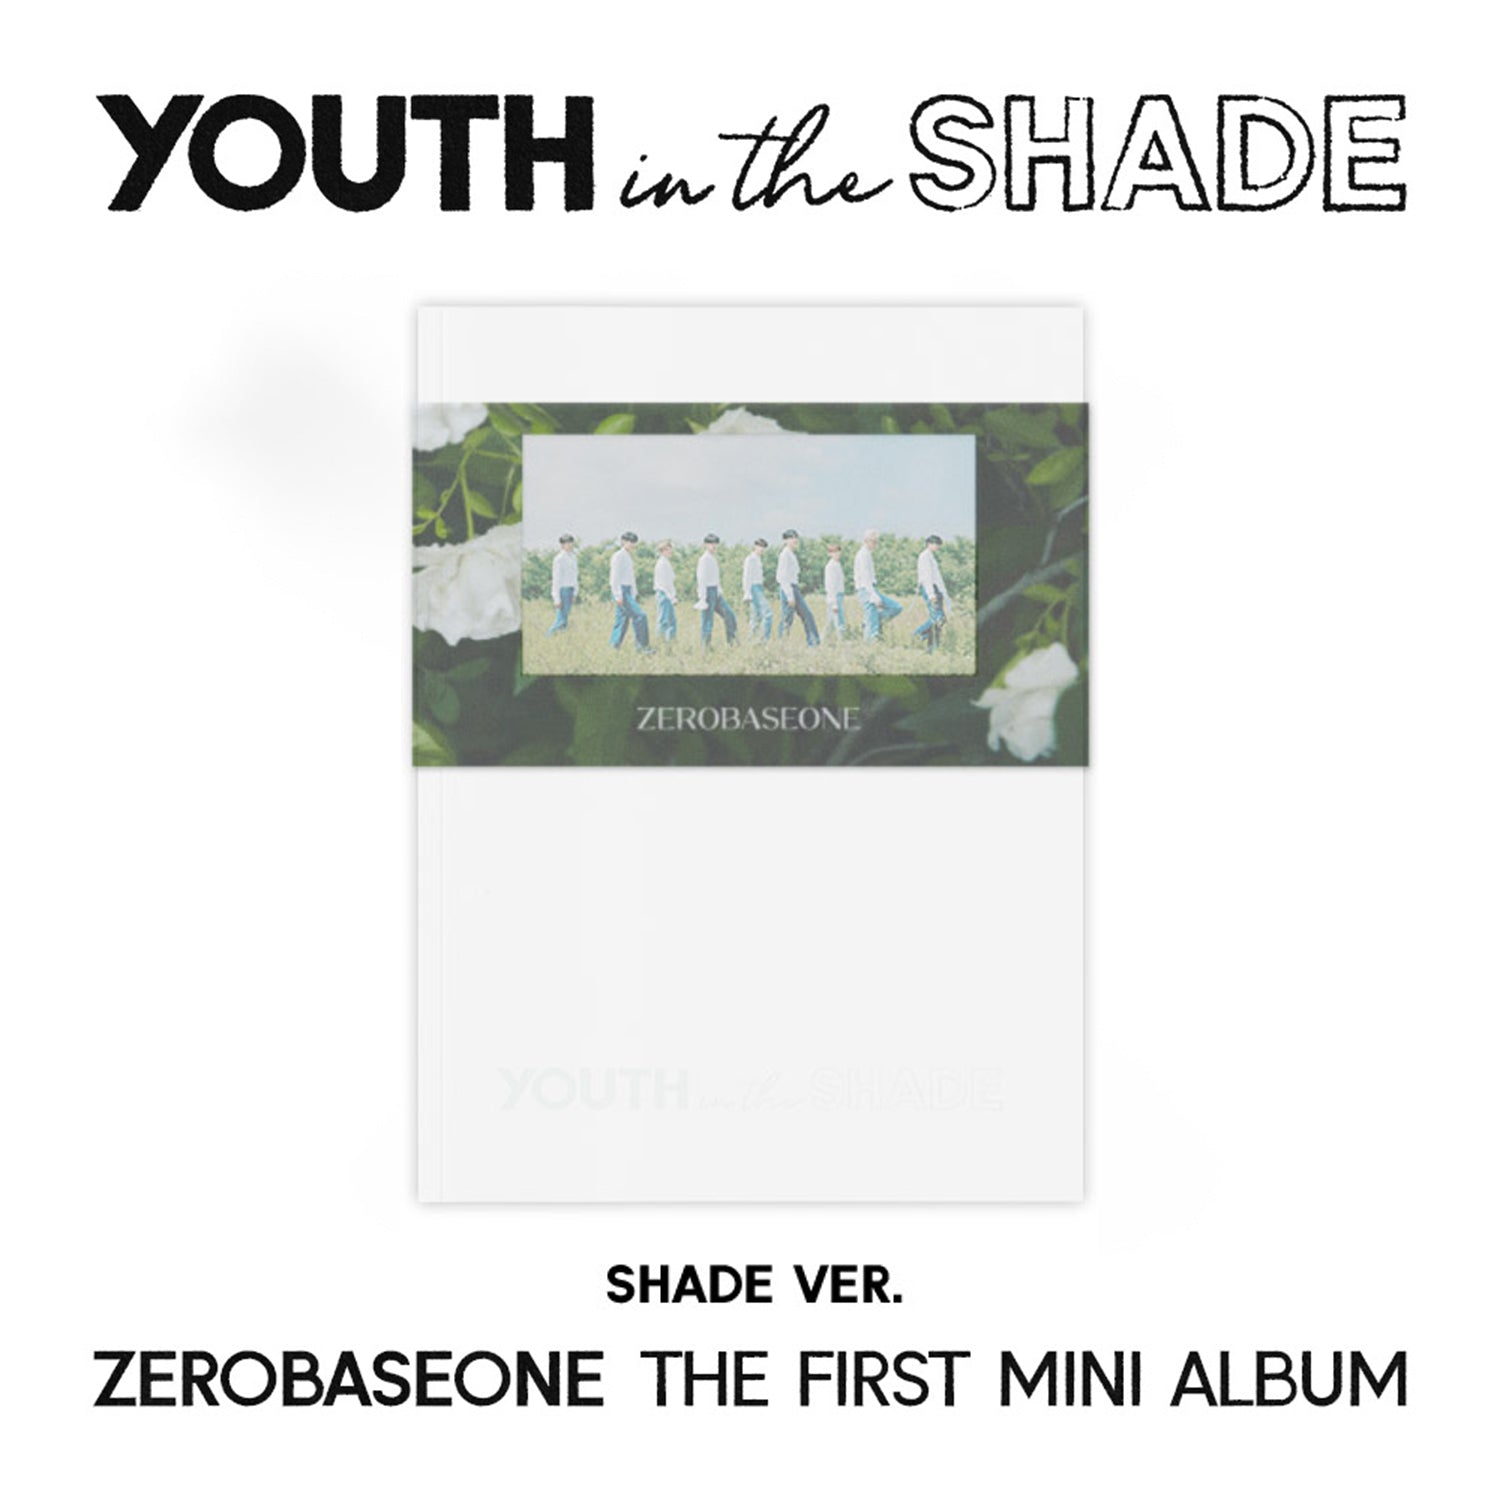 ZEROBASEONE - [YOUTH IN THE SHADE] (1st Mini Album SHADE Version)